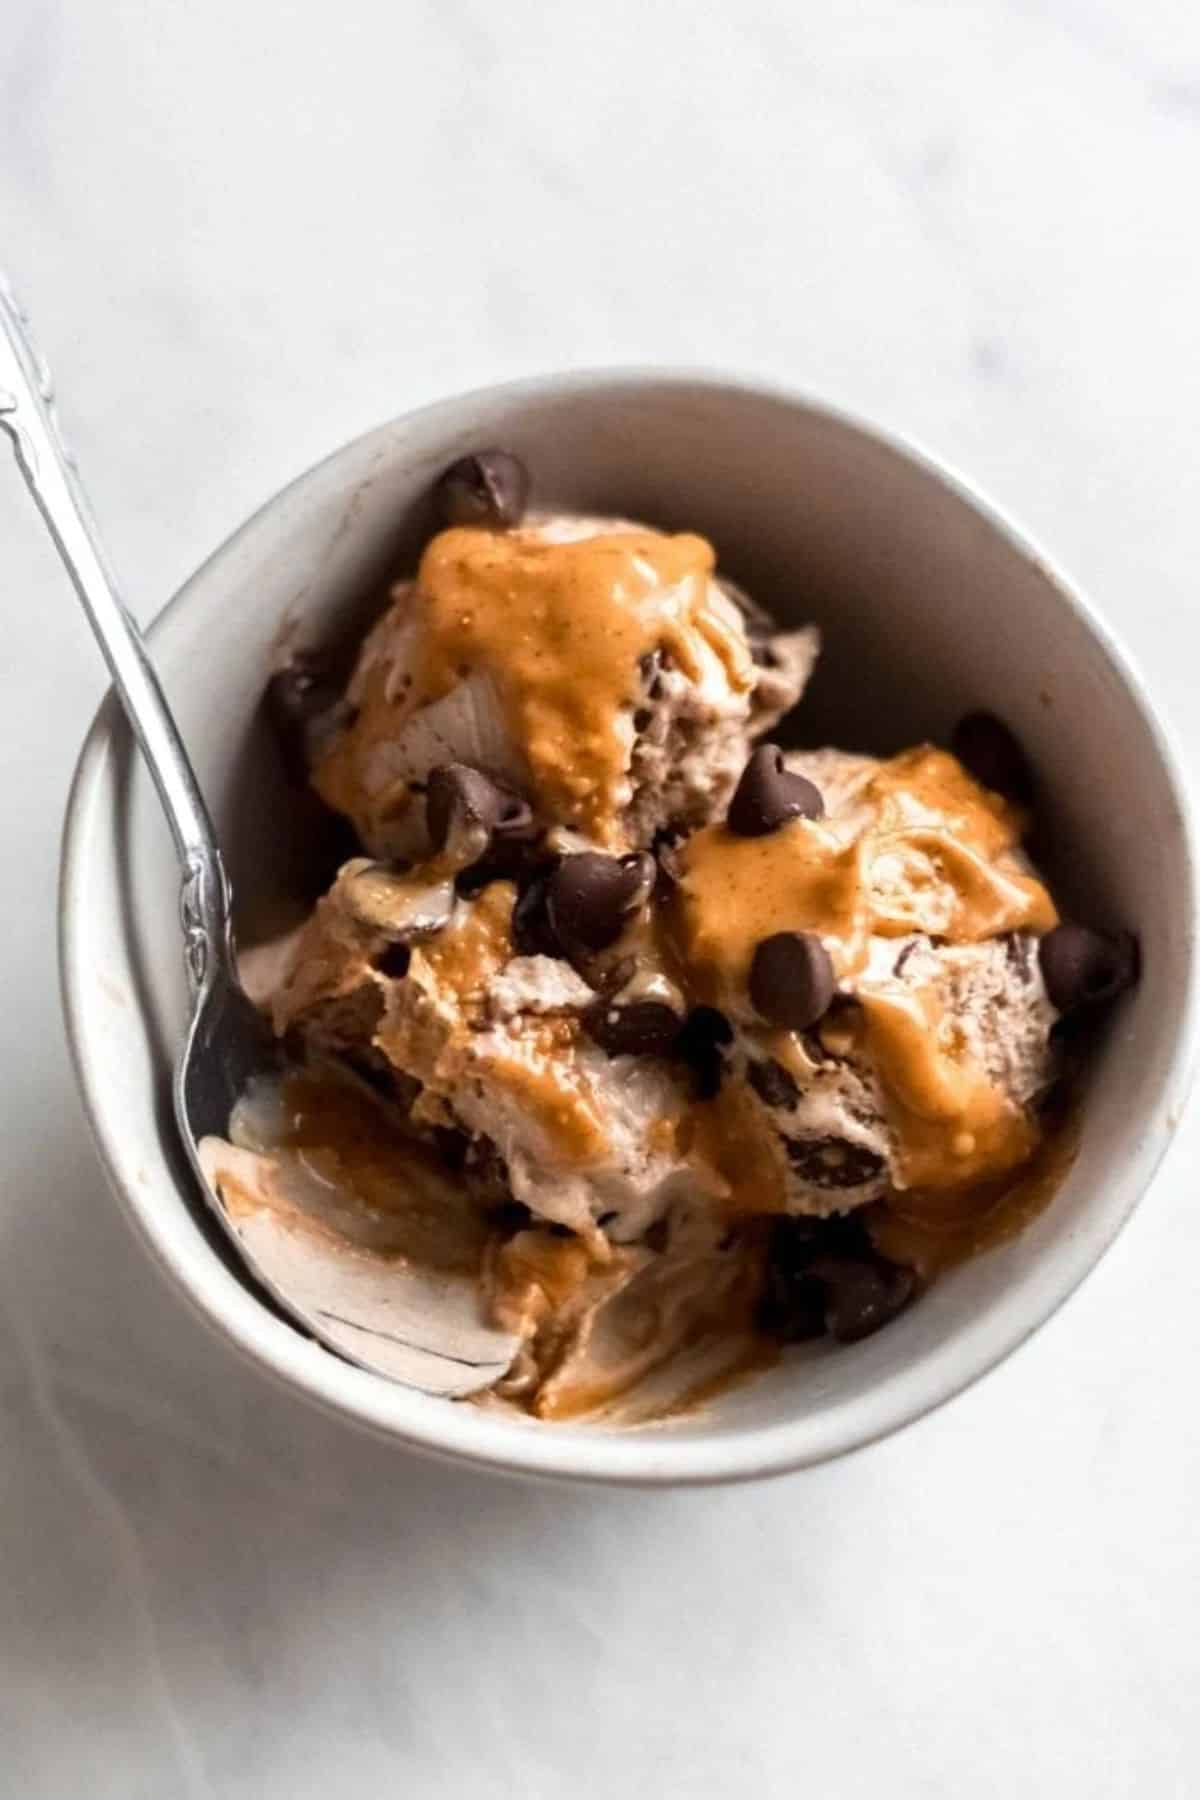 Fresh banana ice cream in a bowl with a spoon.